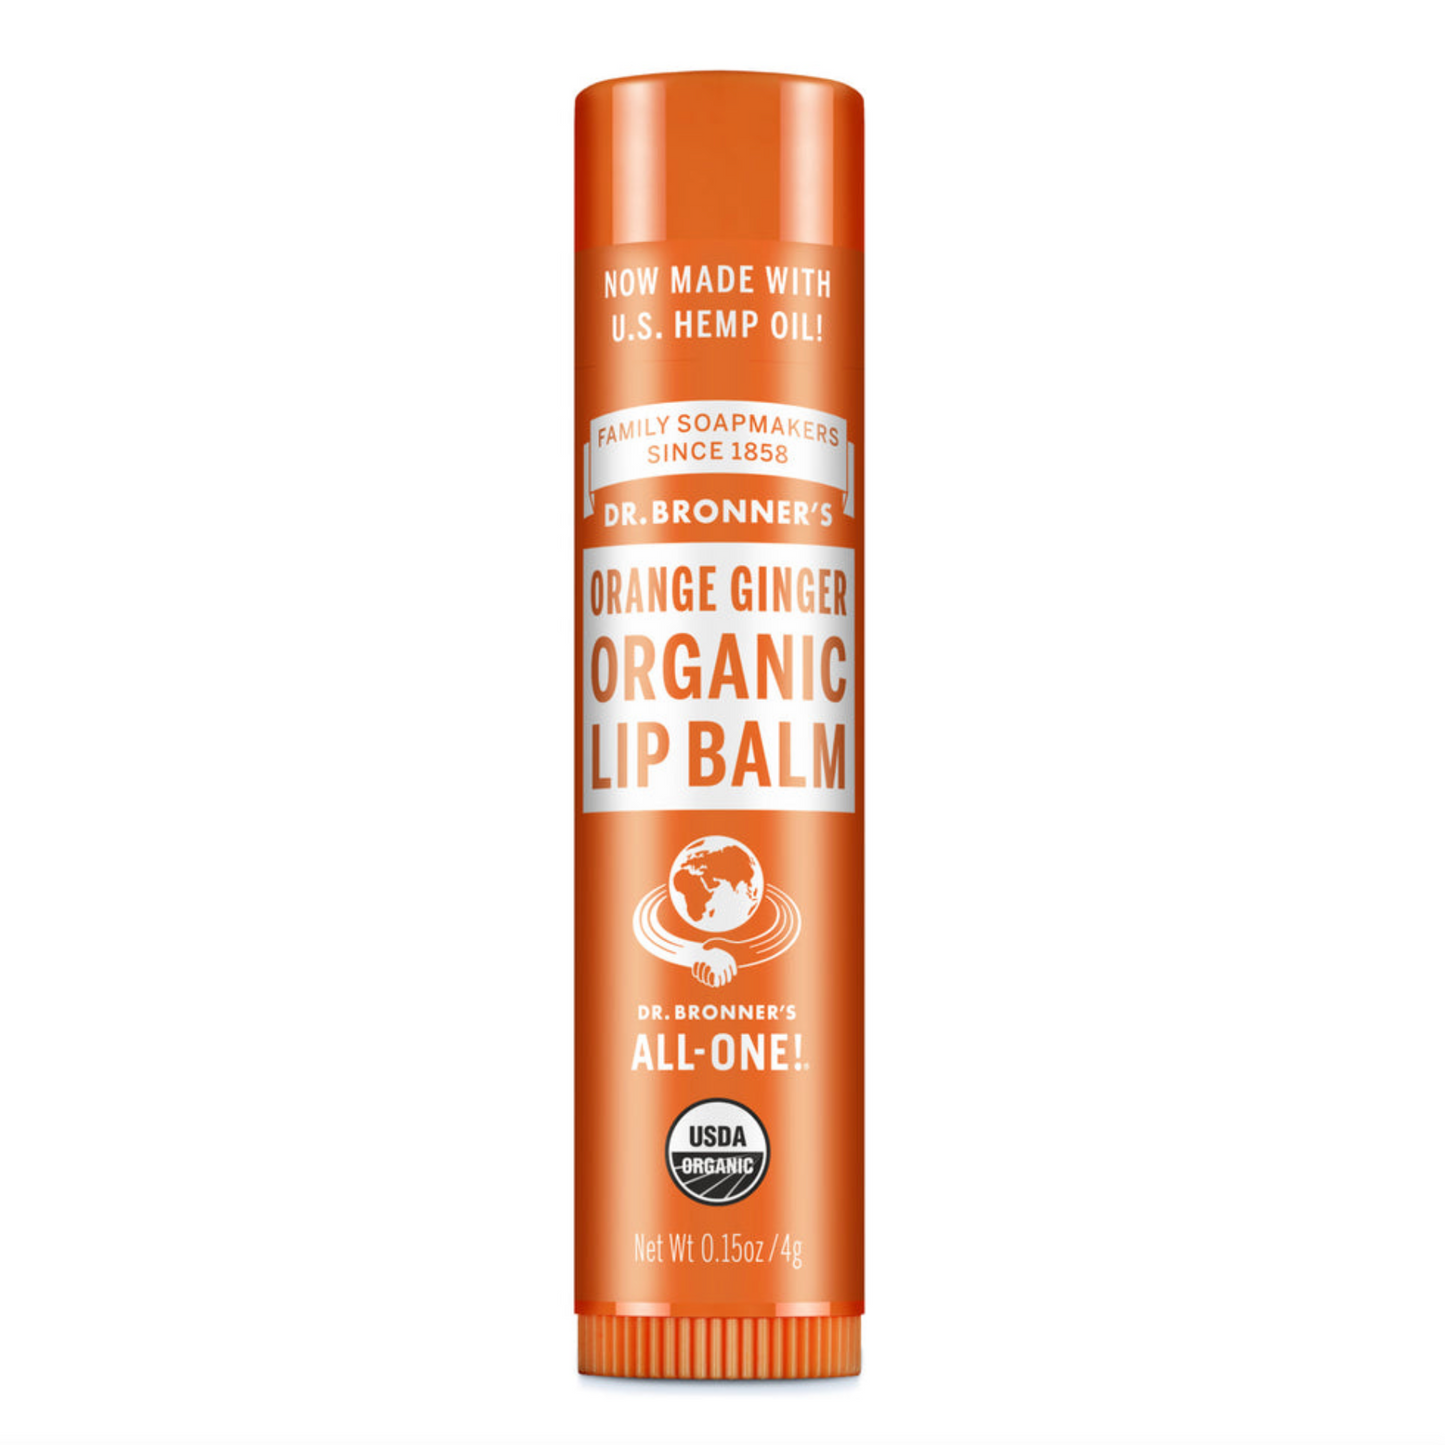 Dr Bronner's Organic Lip Balm 4g, Orange Ginger Flavour Soothes & Protects